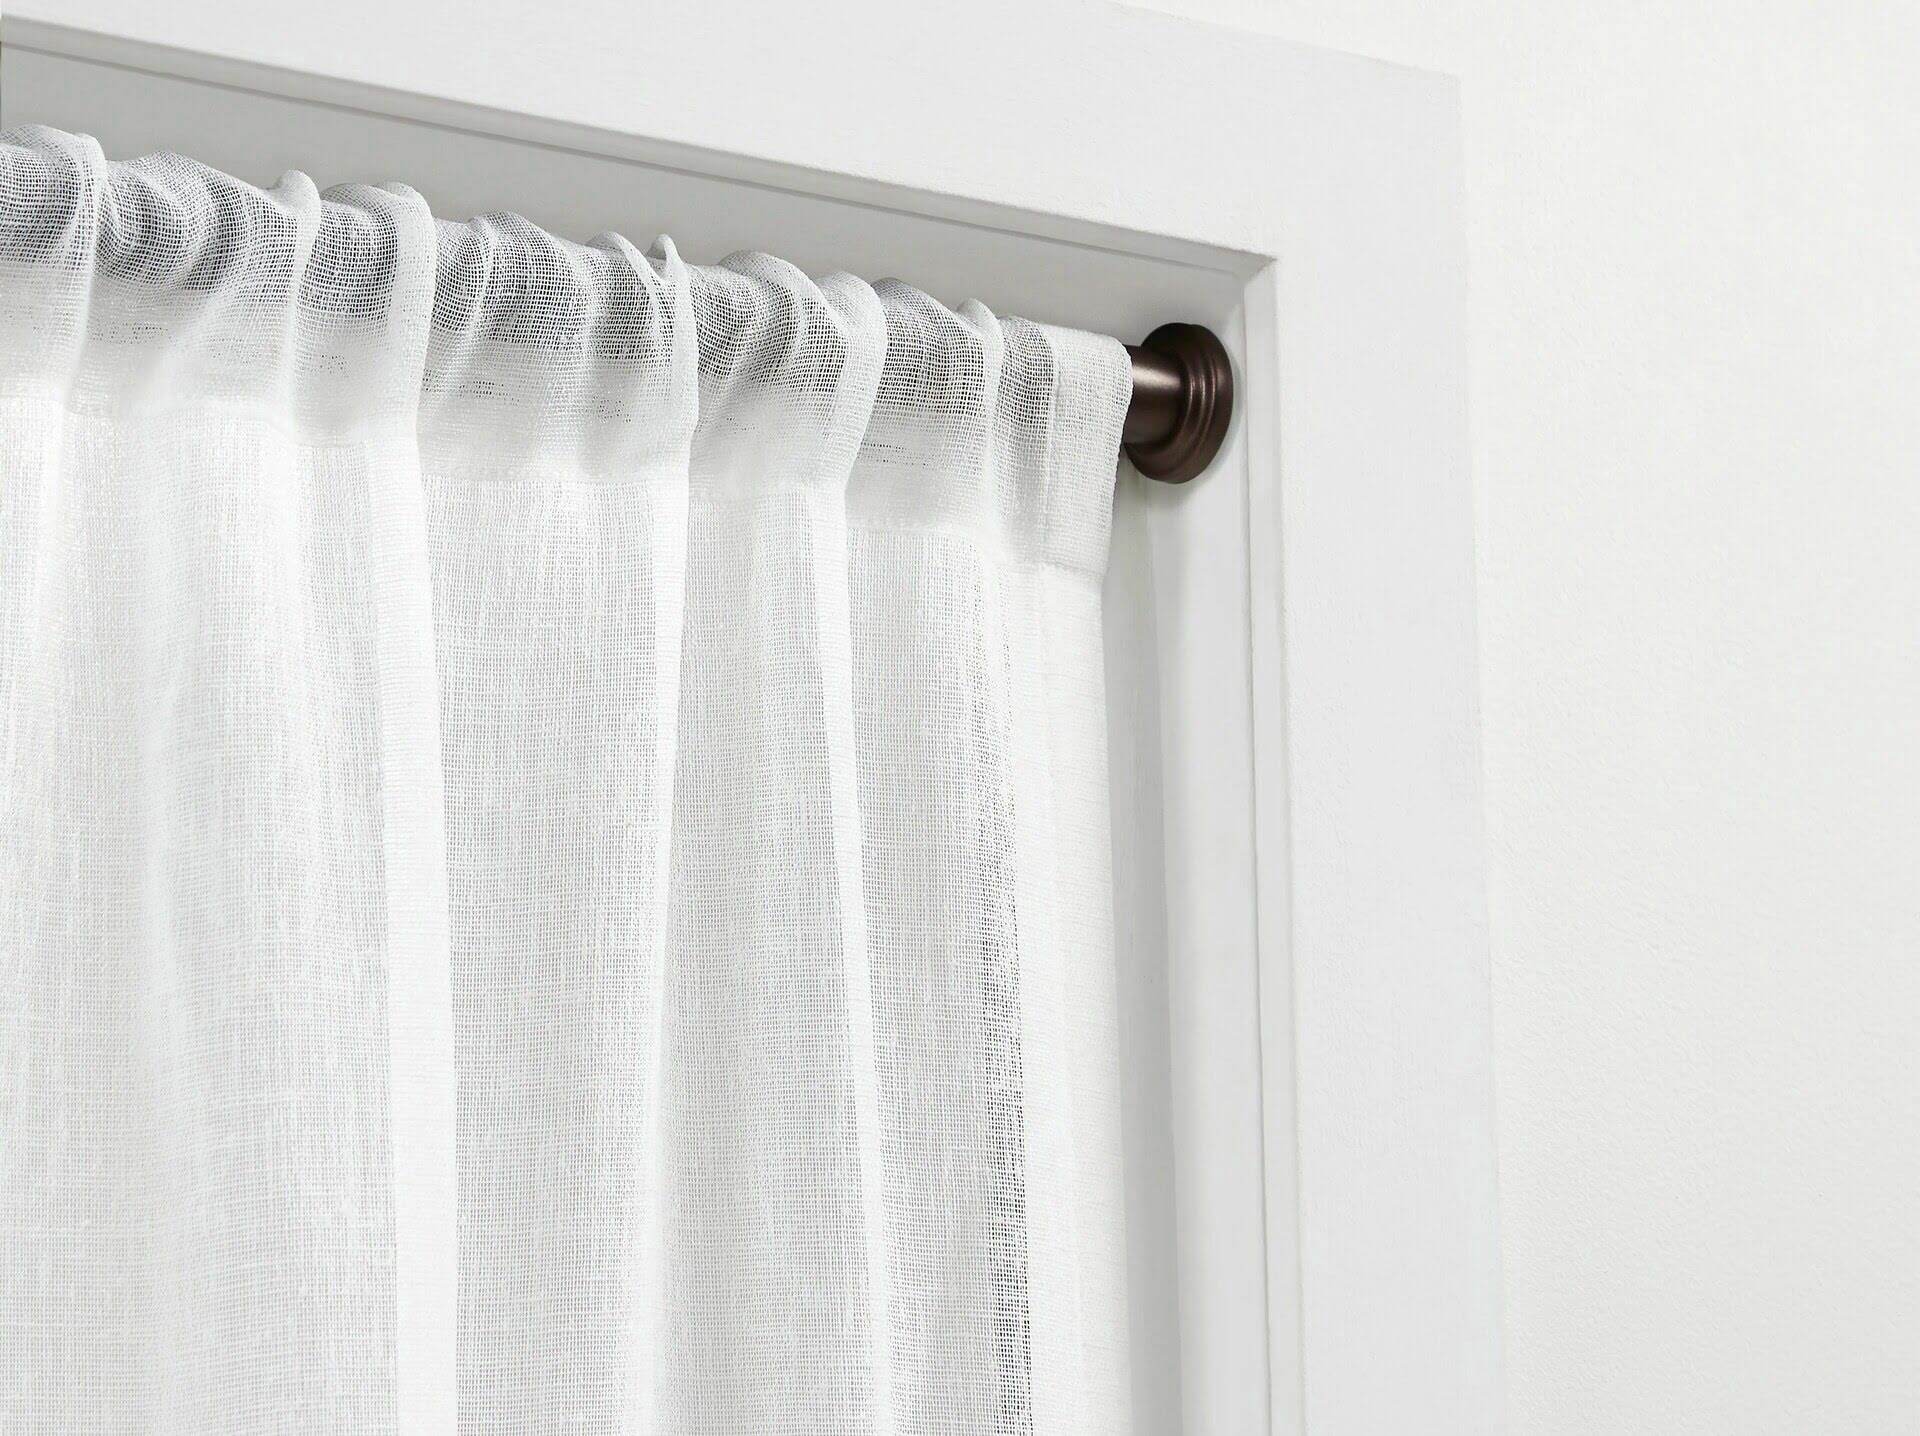 How To Hang Drapes Without Drilling Holes